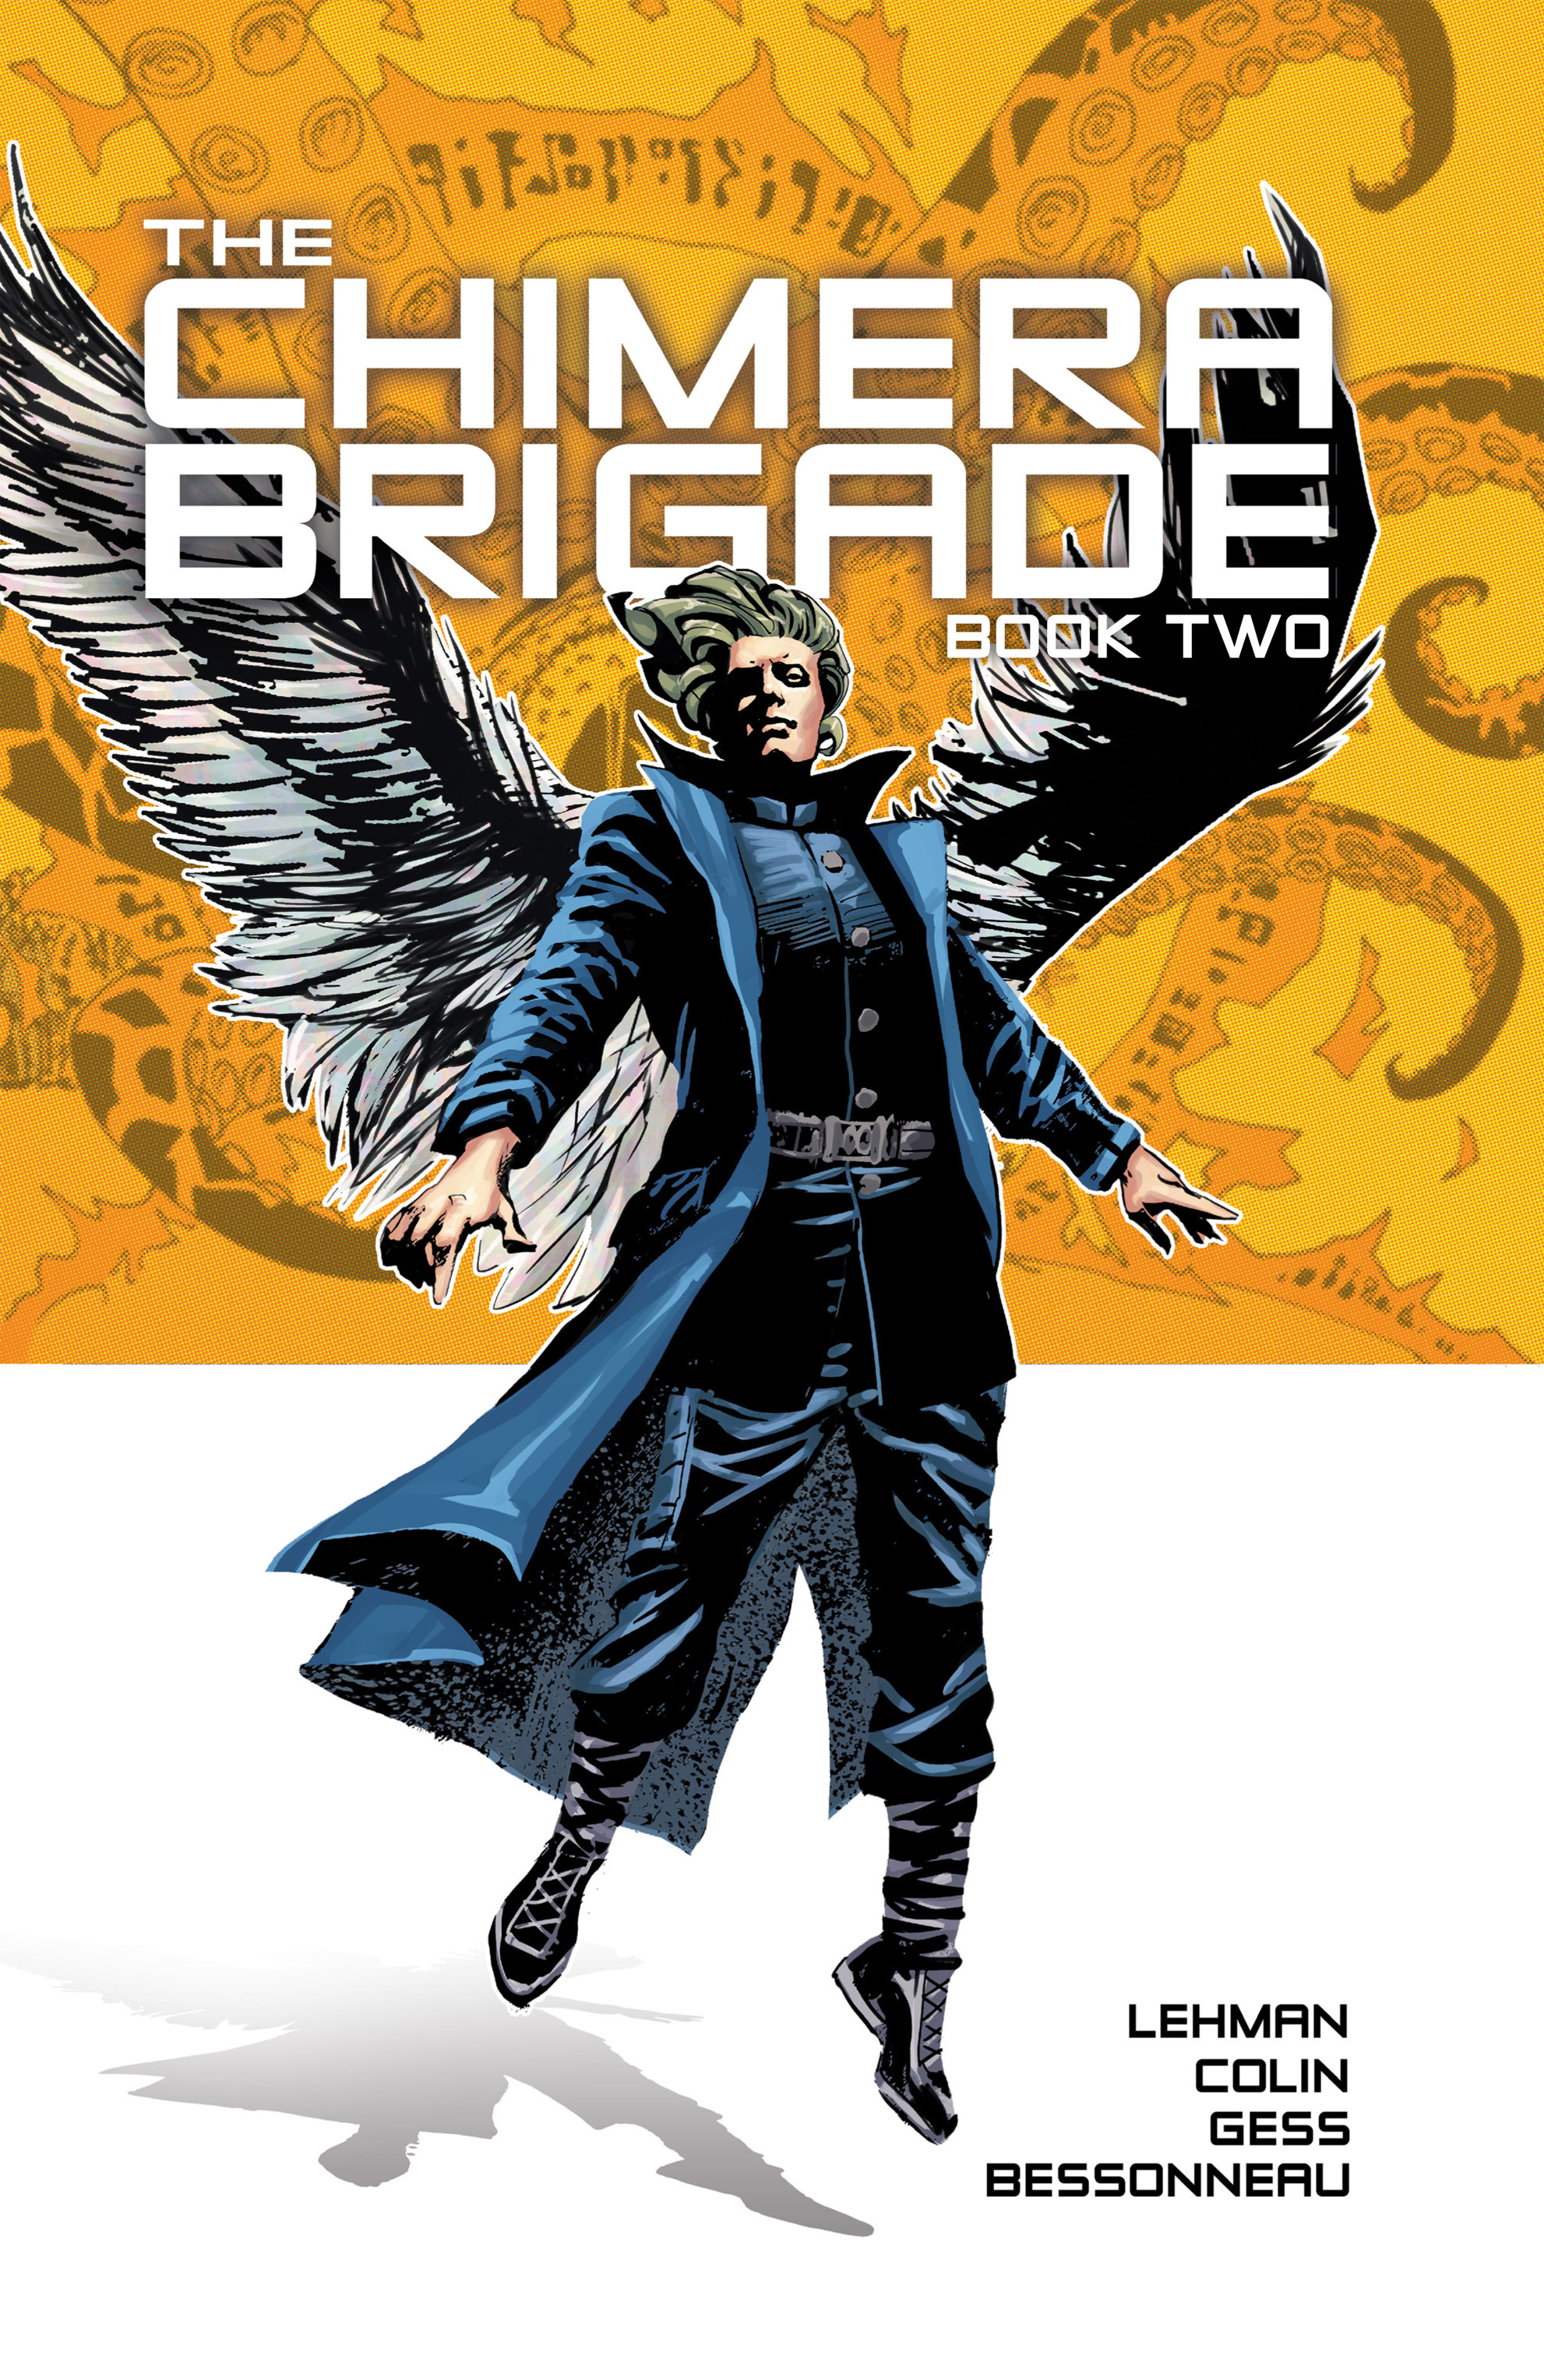 Read online The Chimera Brigade comic -  Issue #2 - 1